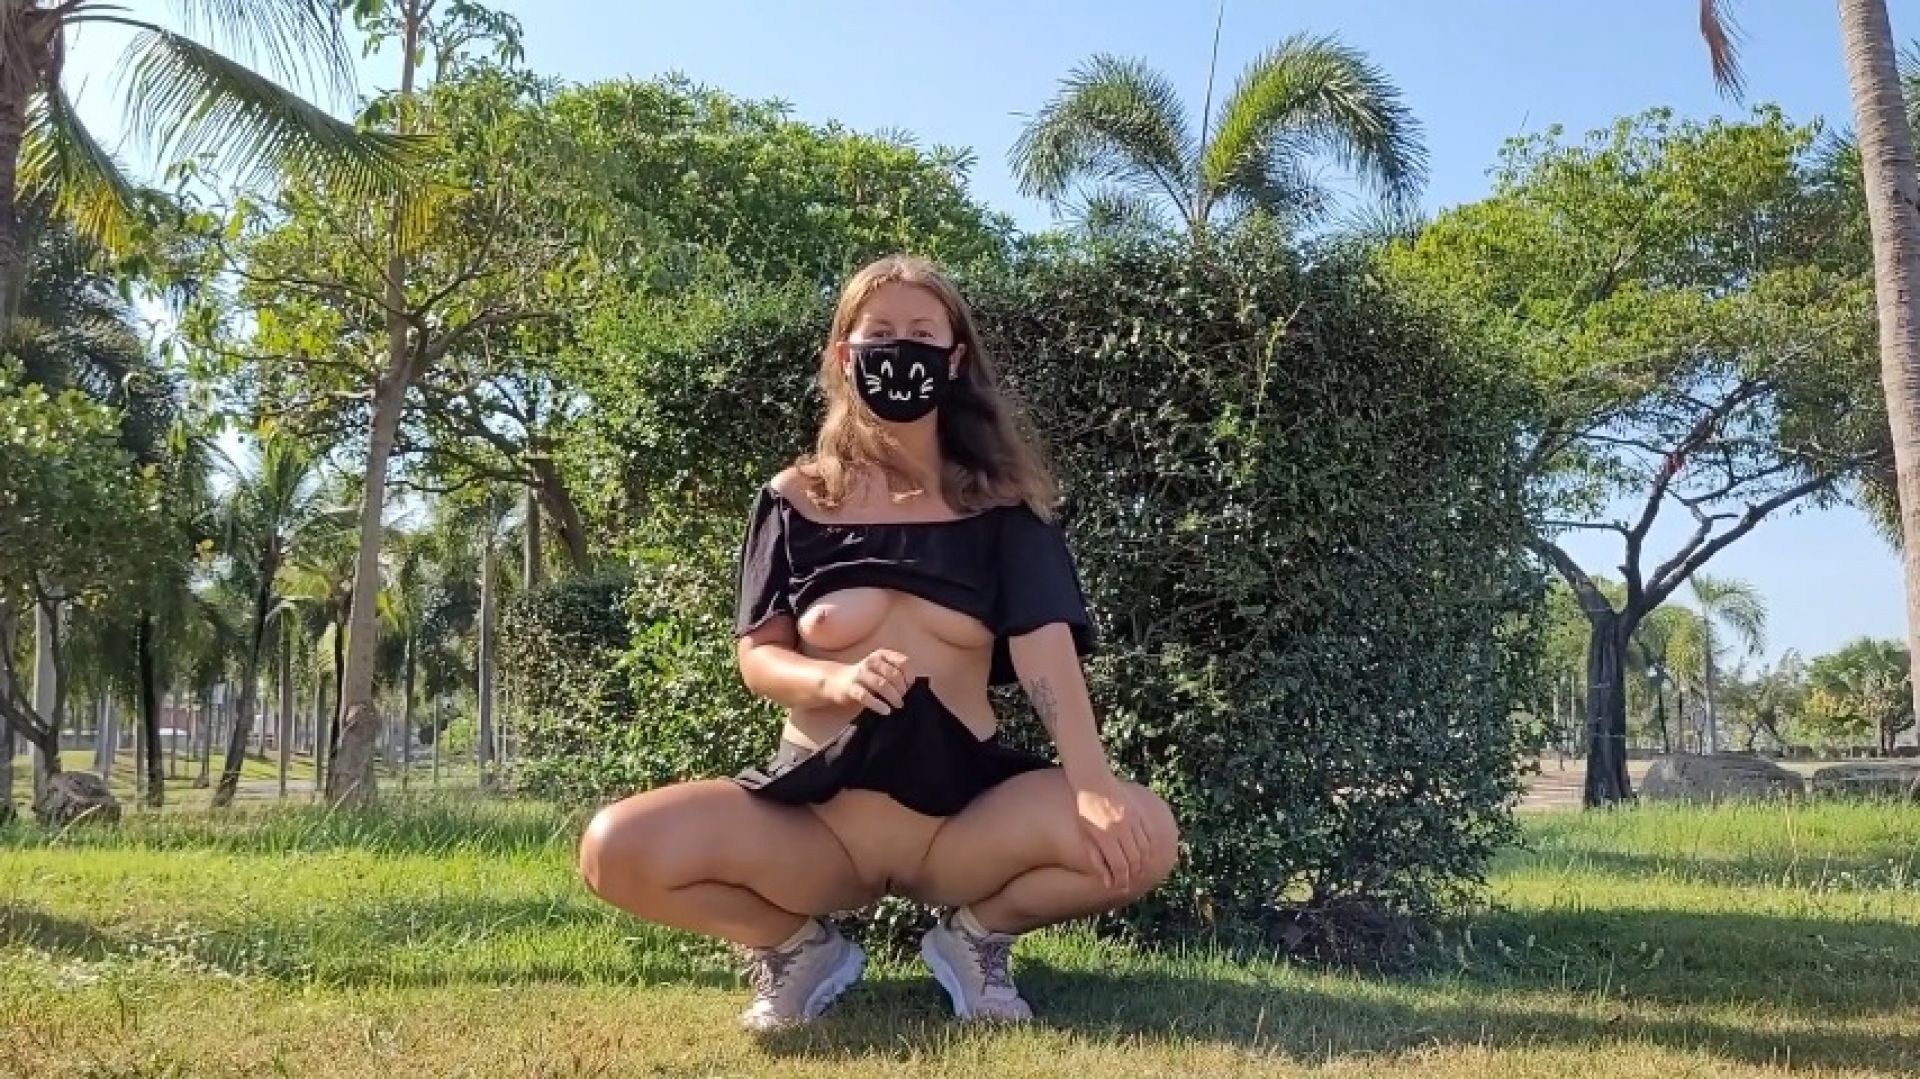 I flash my pussy and tits in the park